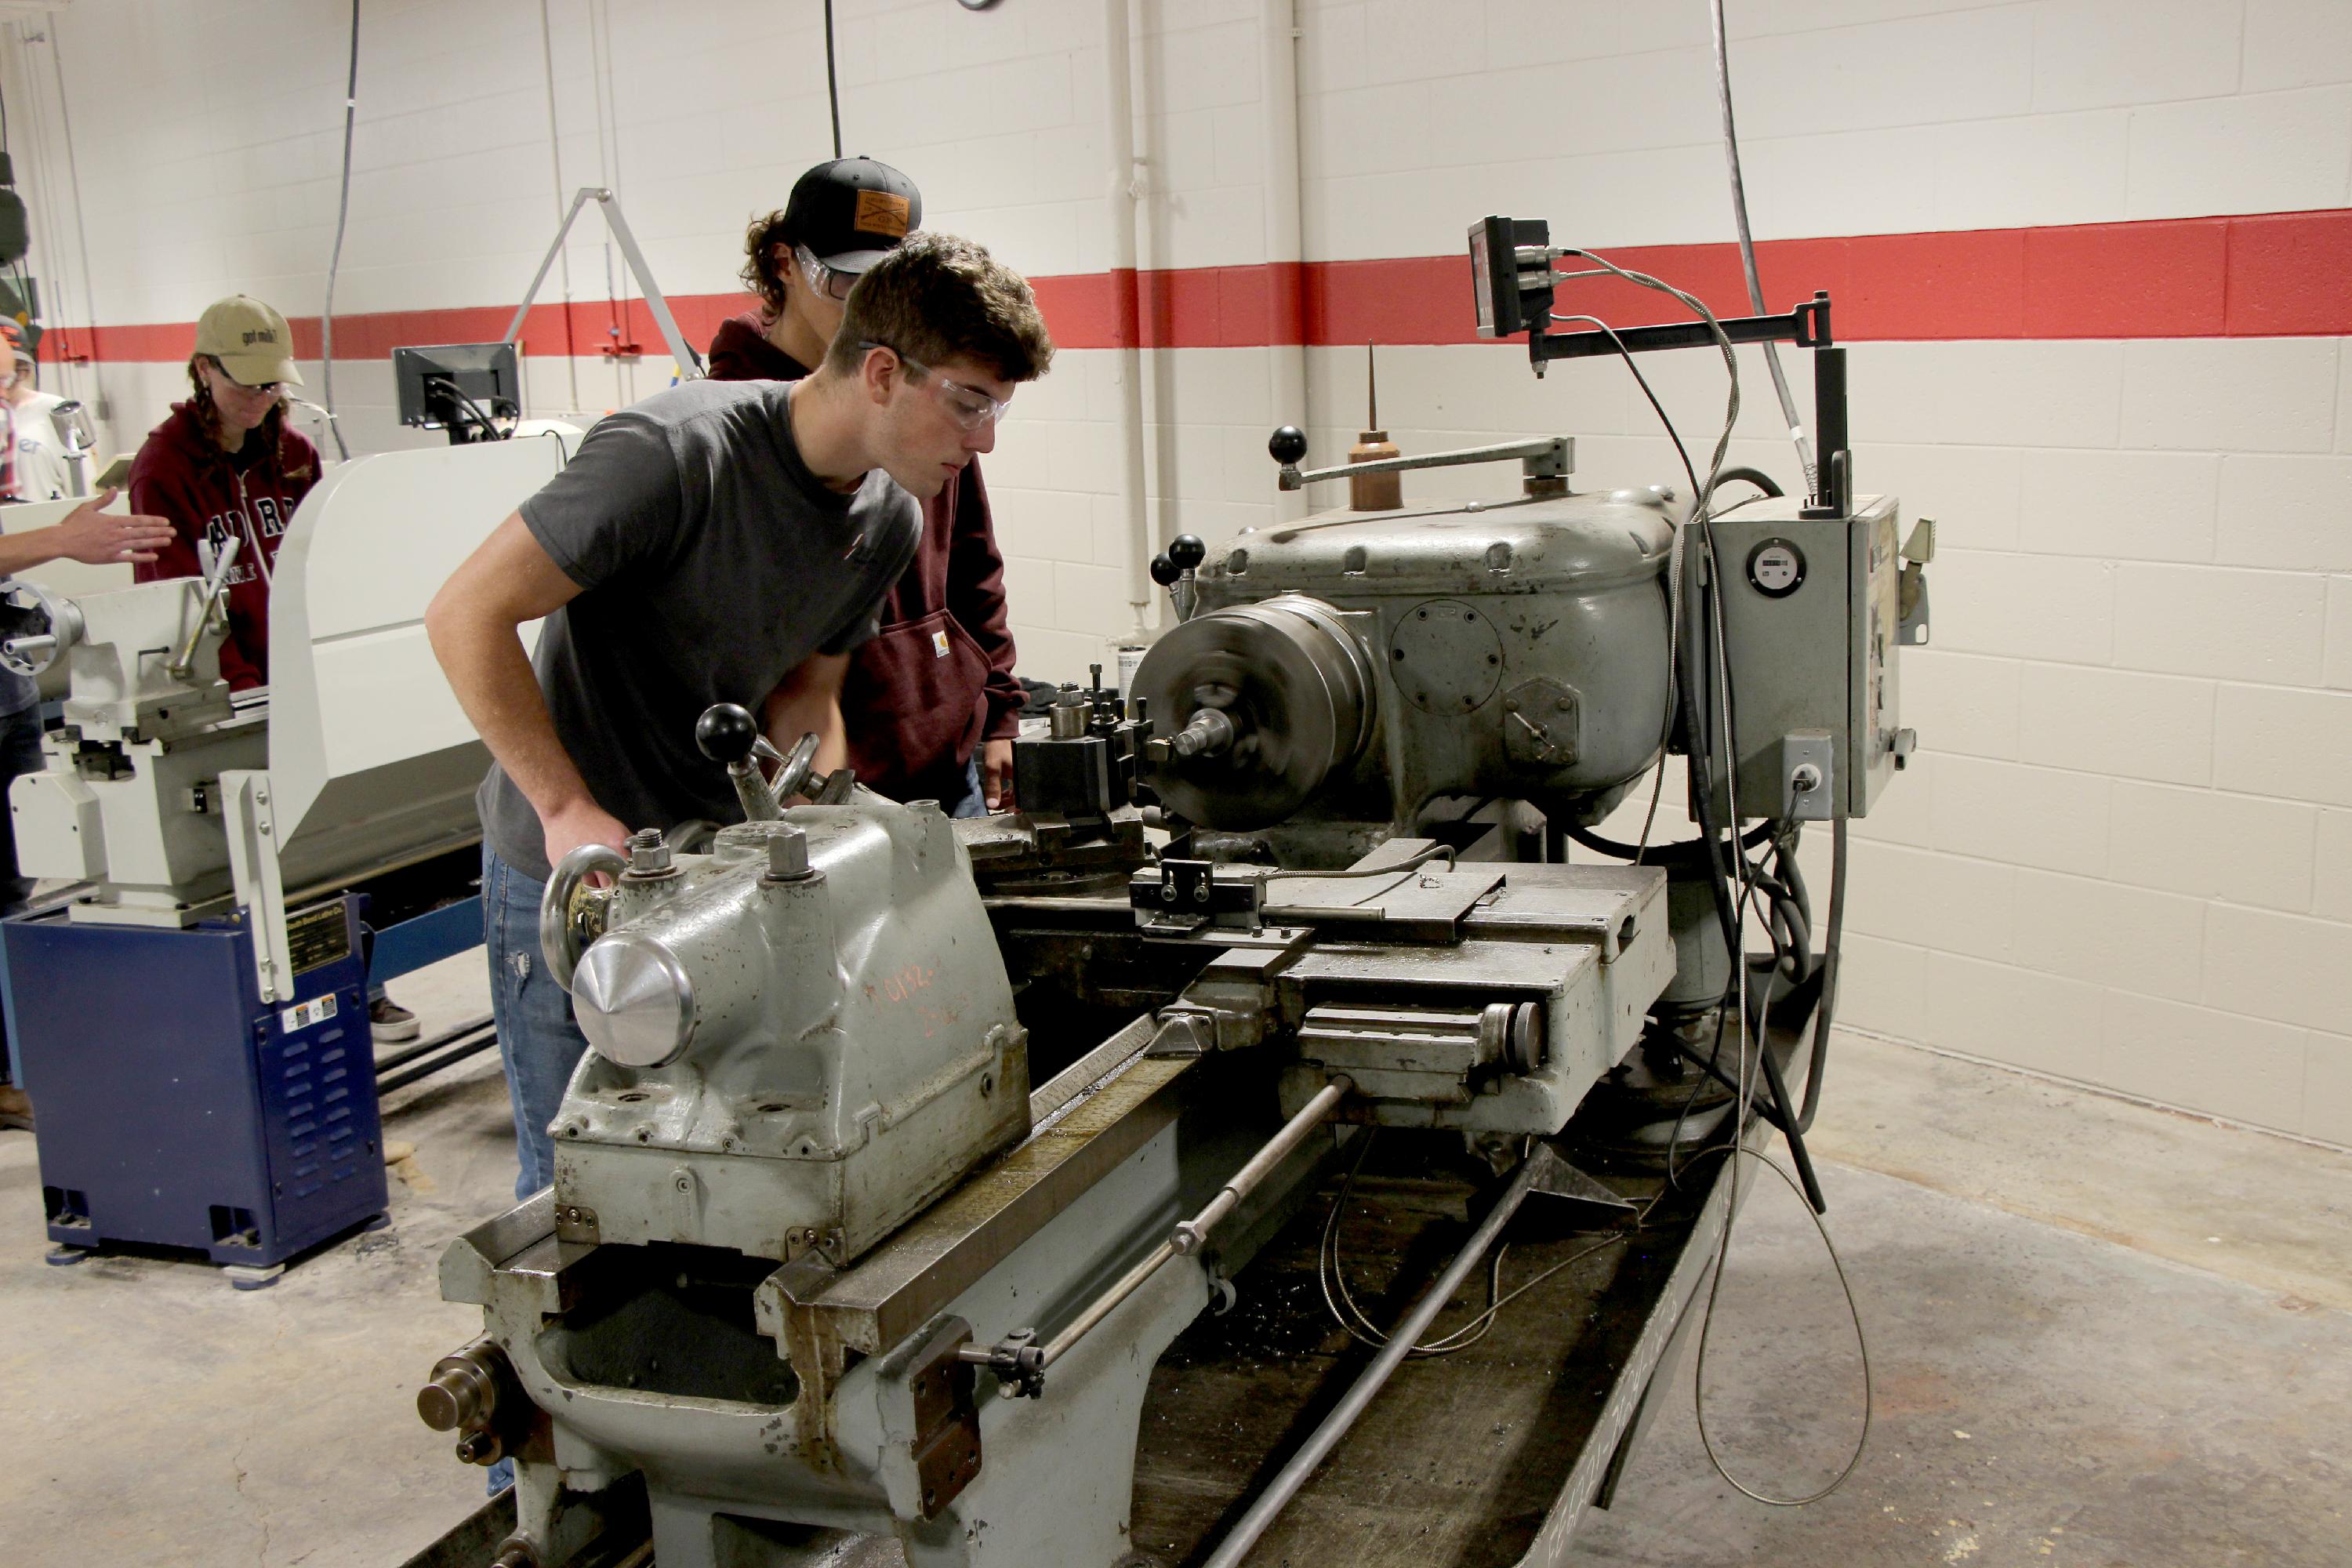 Two students work on a piece of equipment in the manufacturing lab